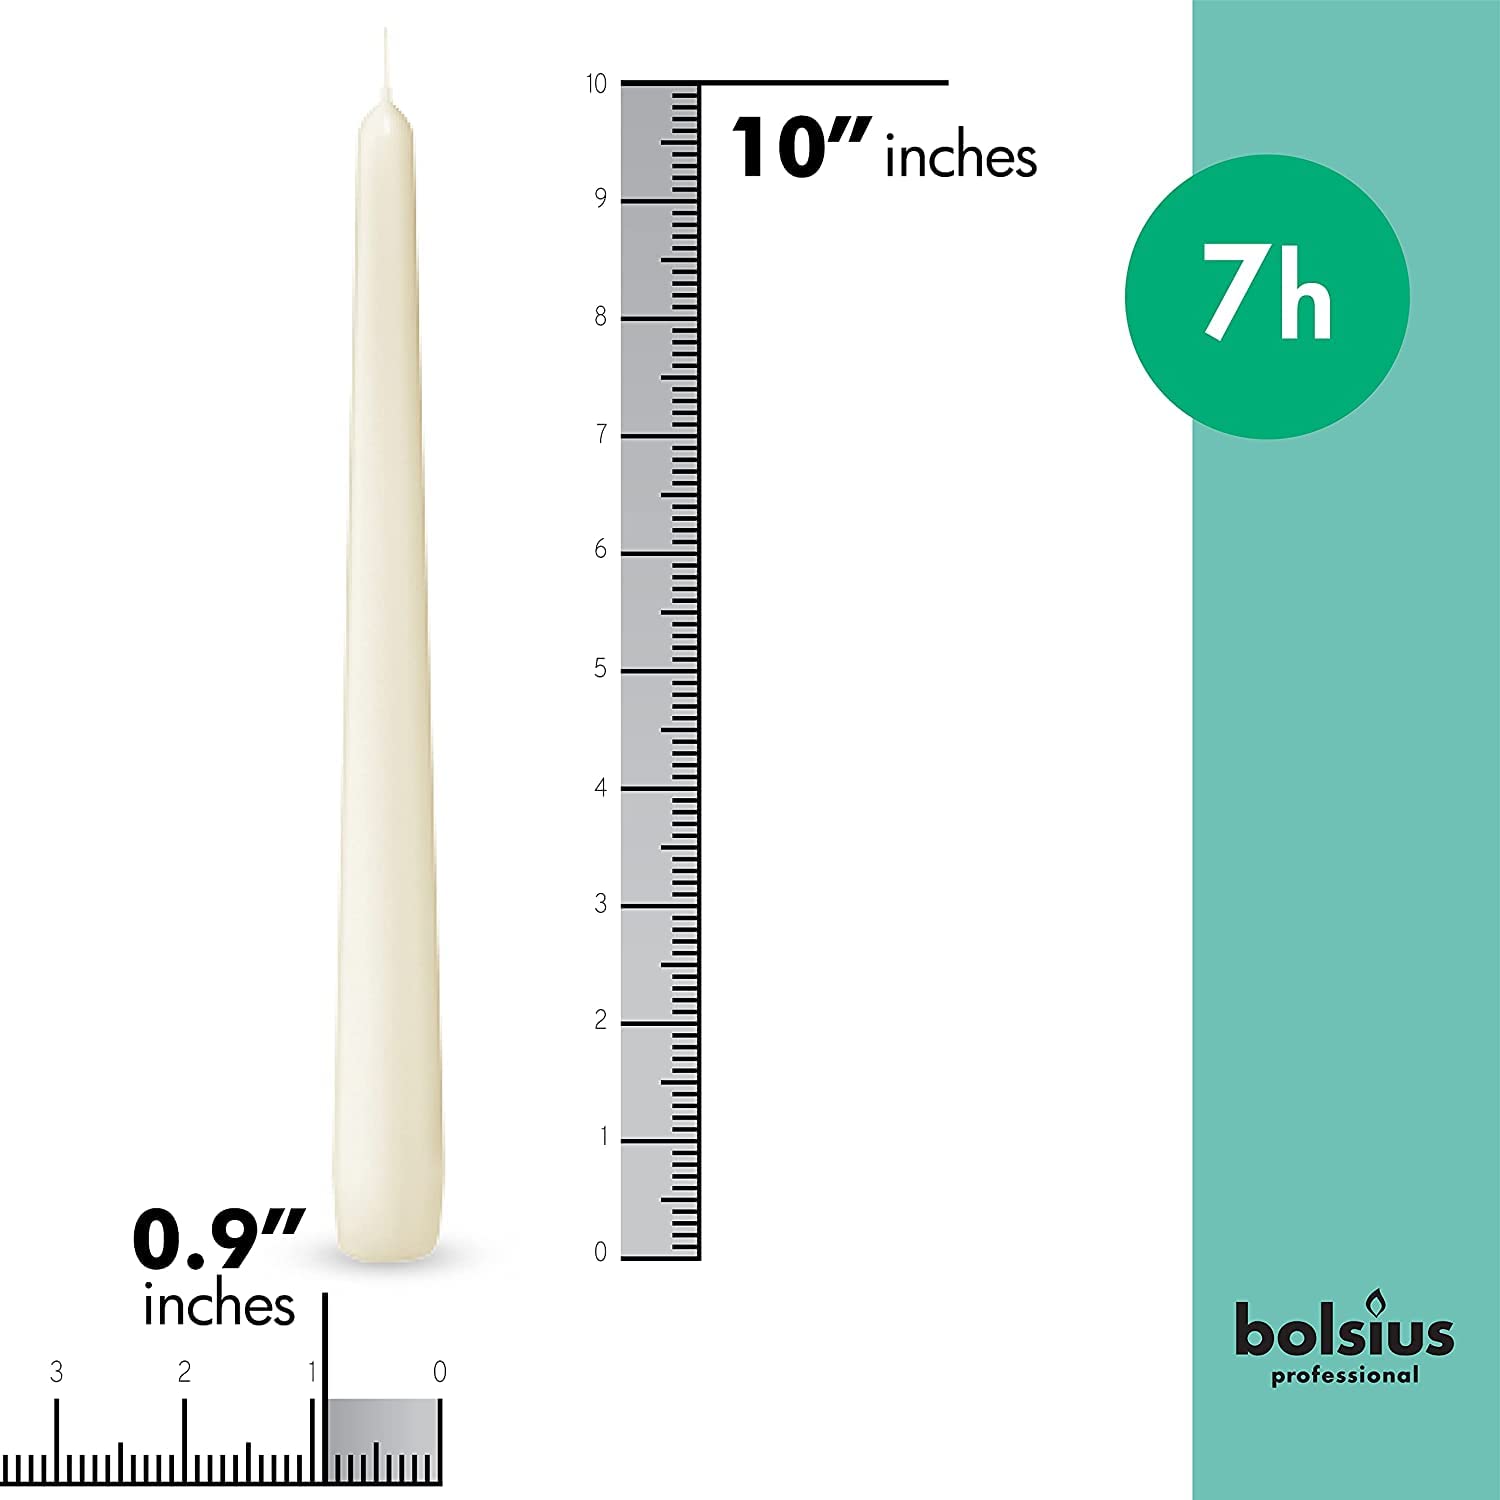 BOLSIUS Ivory Taper Candles 100 Count Bulk Pack - 10 Inch Dinner Candle Set - 7+ Burn Hours - Premium European Quality - Smooth Flame - 100% Cotton Wick - Smokeless & Dripless Household Candlesticks  - Like New